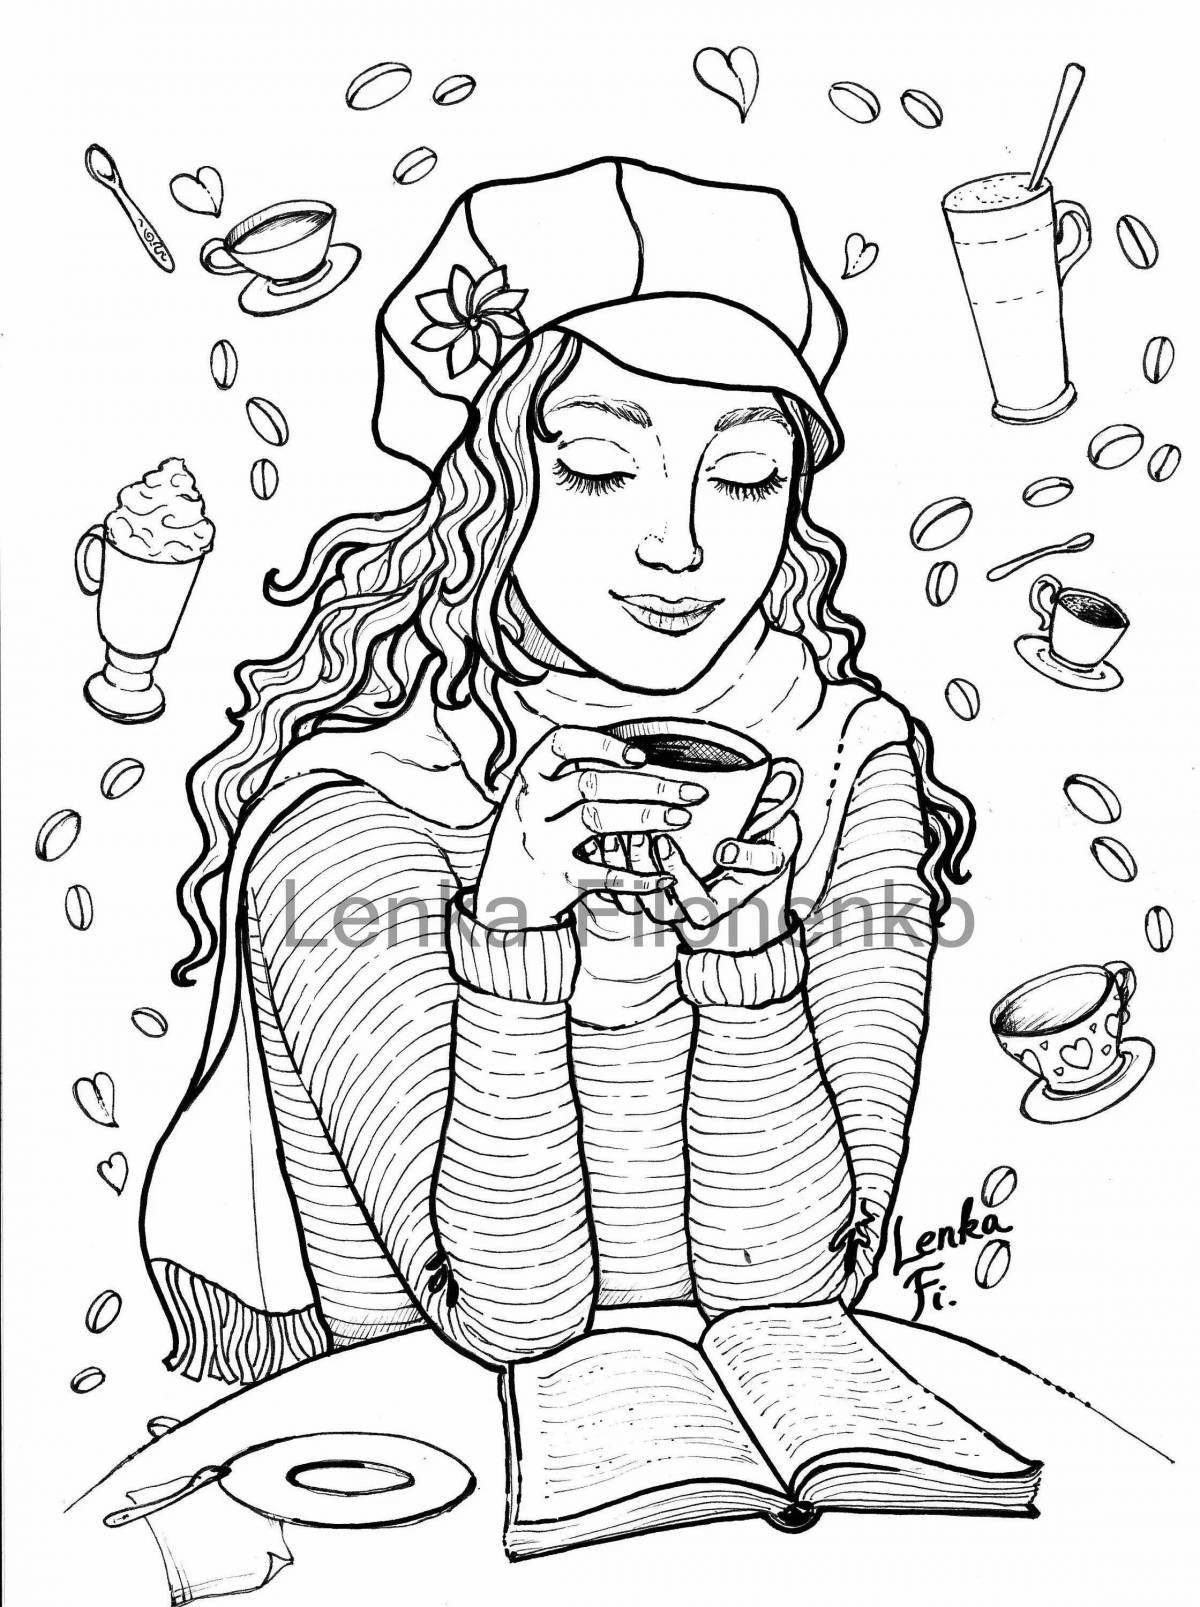 Sparkling drink coloring book for girls